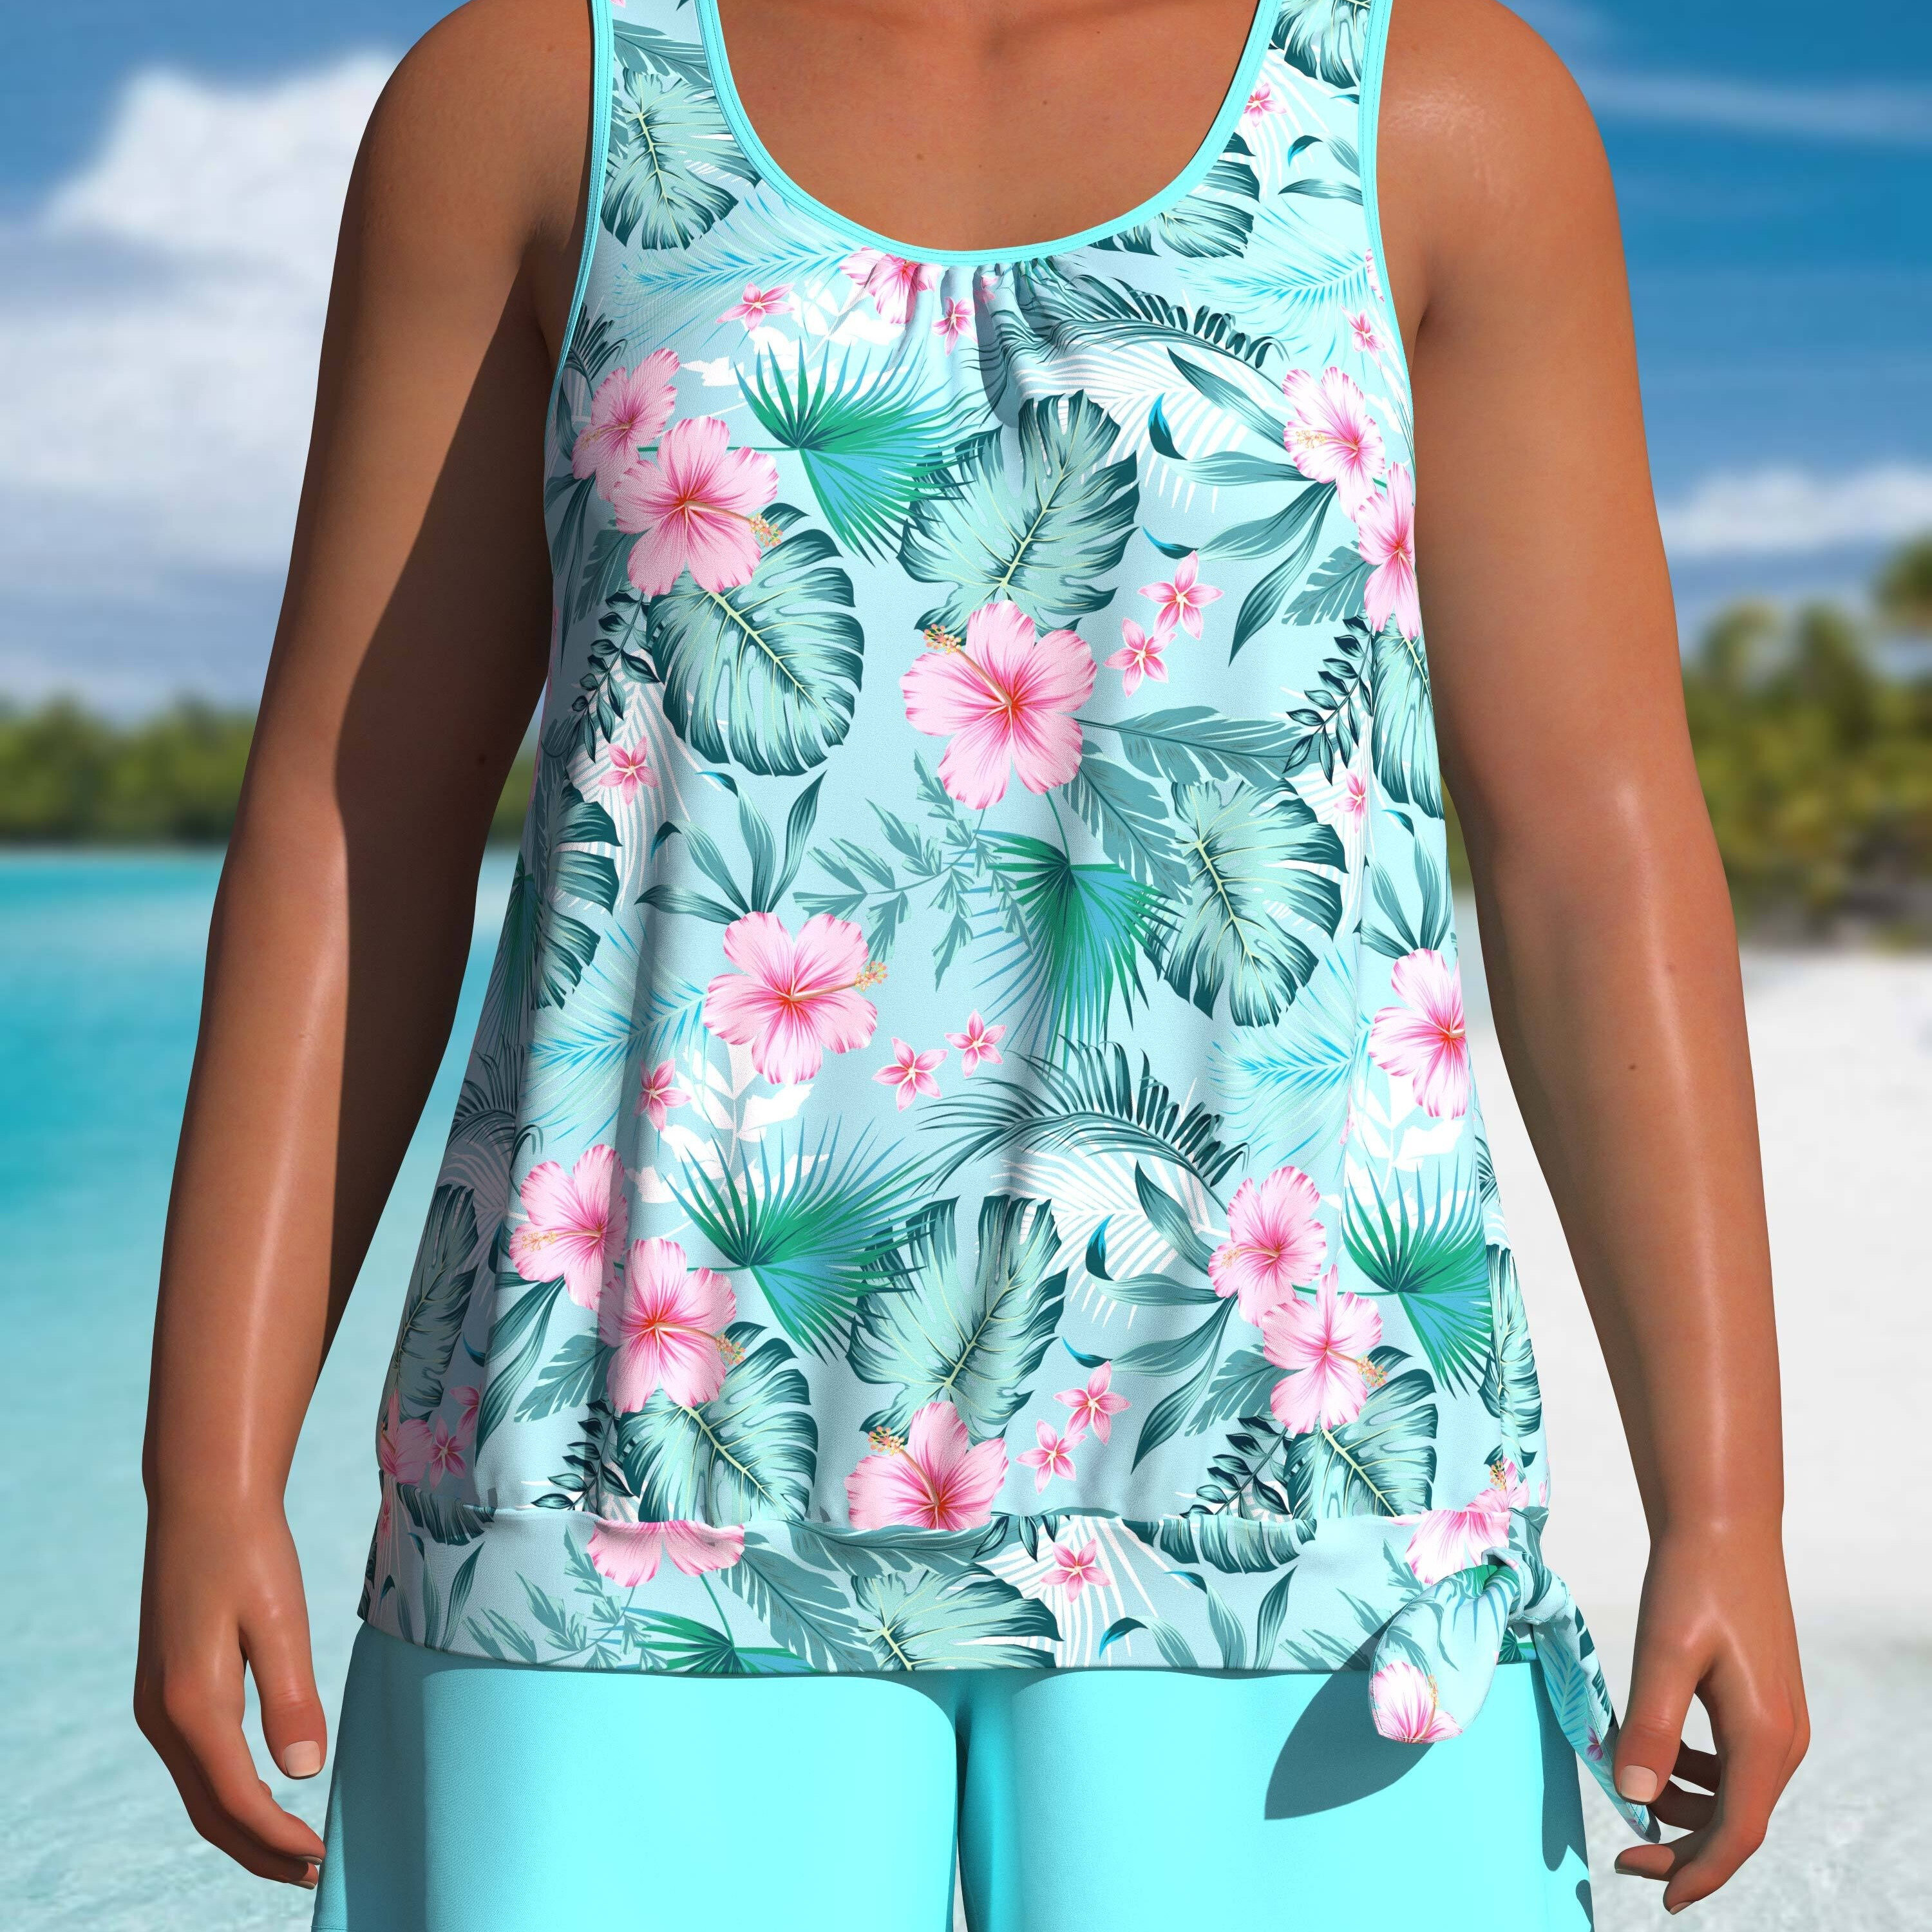 

Women's Plus Size Floral Print Tankini Swimsuit Set, Casual Style, 2-piece Swim Top And Shorts, Beachwear, Poolside Outfit, Summer Fashion